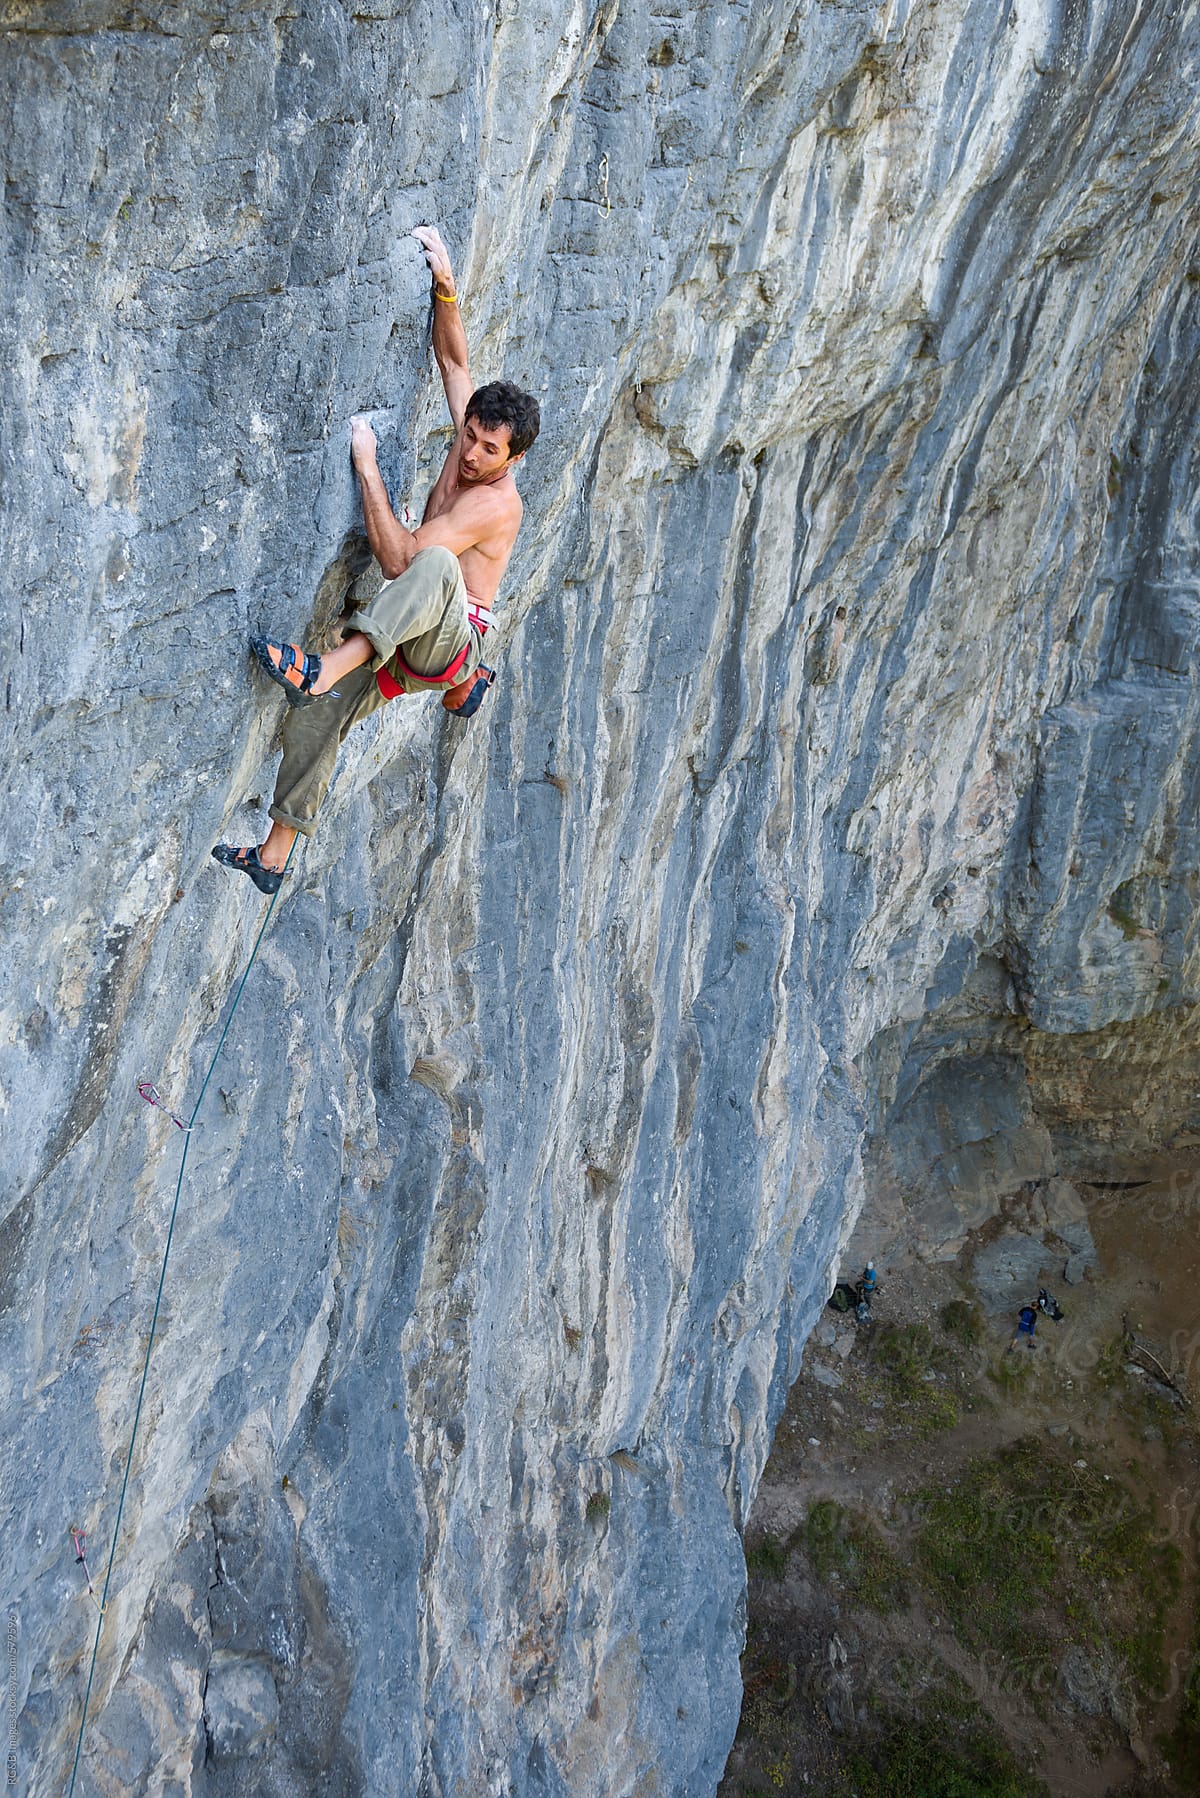 Male rock climber high above on the rock face